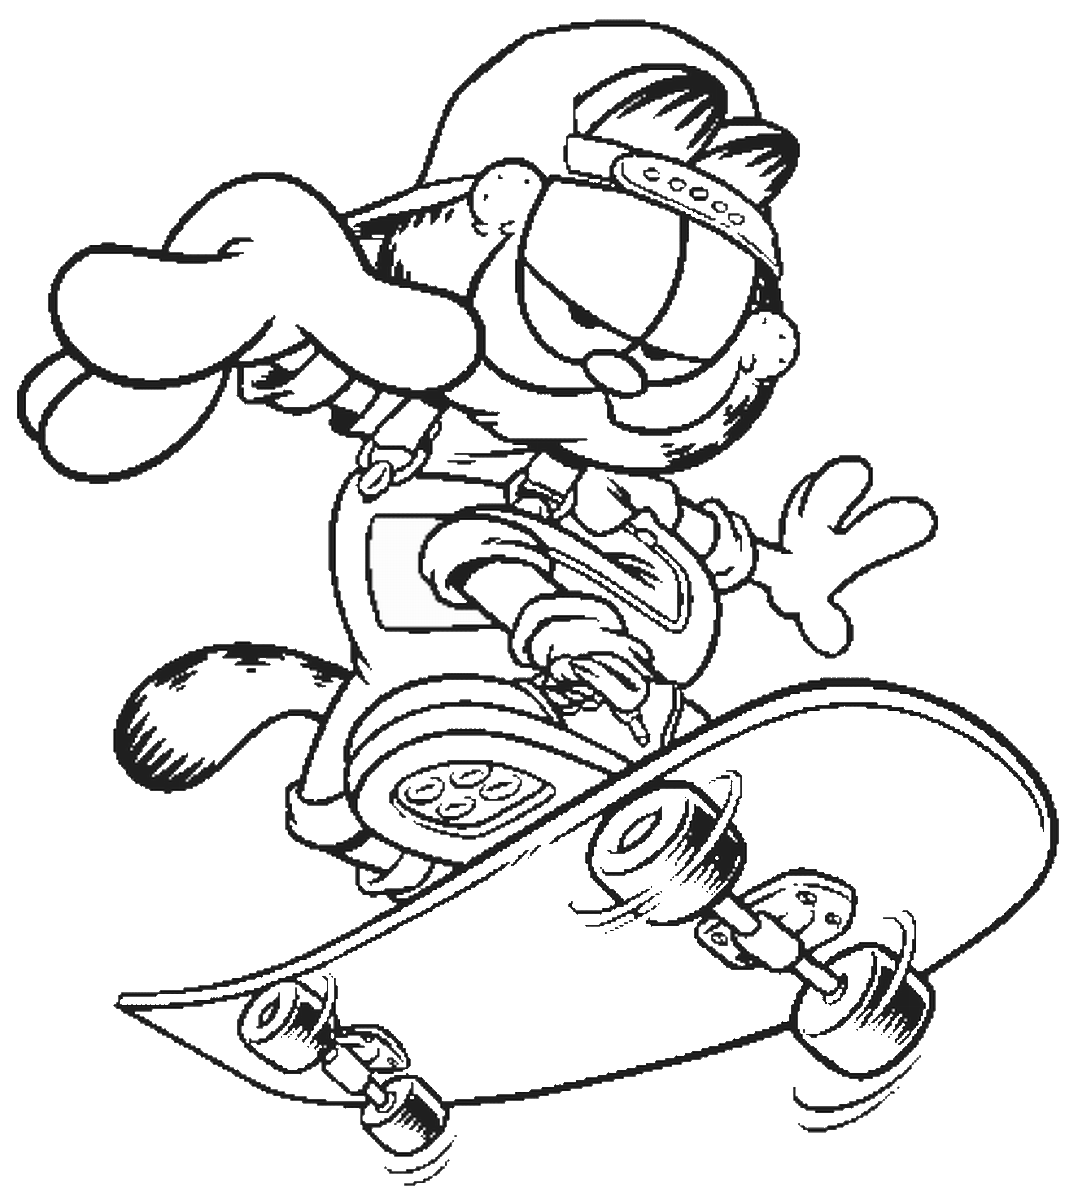 garfield colouring pages garfield coloring pages food coloring pages coloring colouring pages garfield 